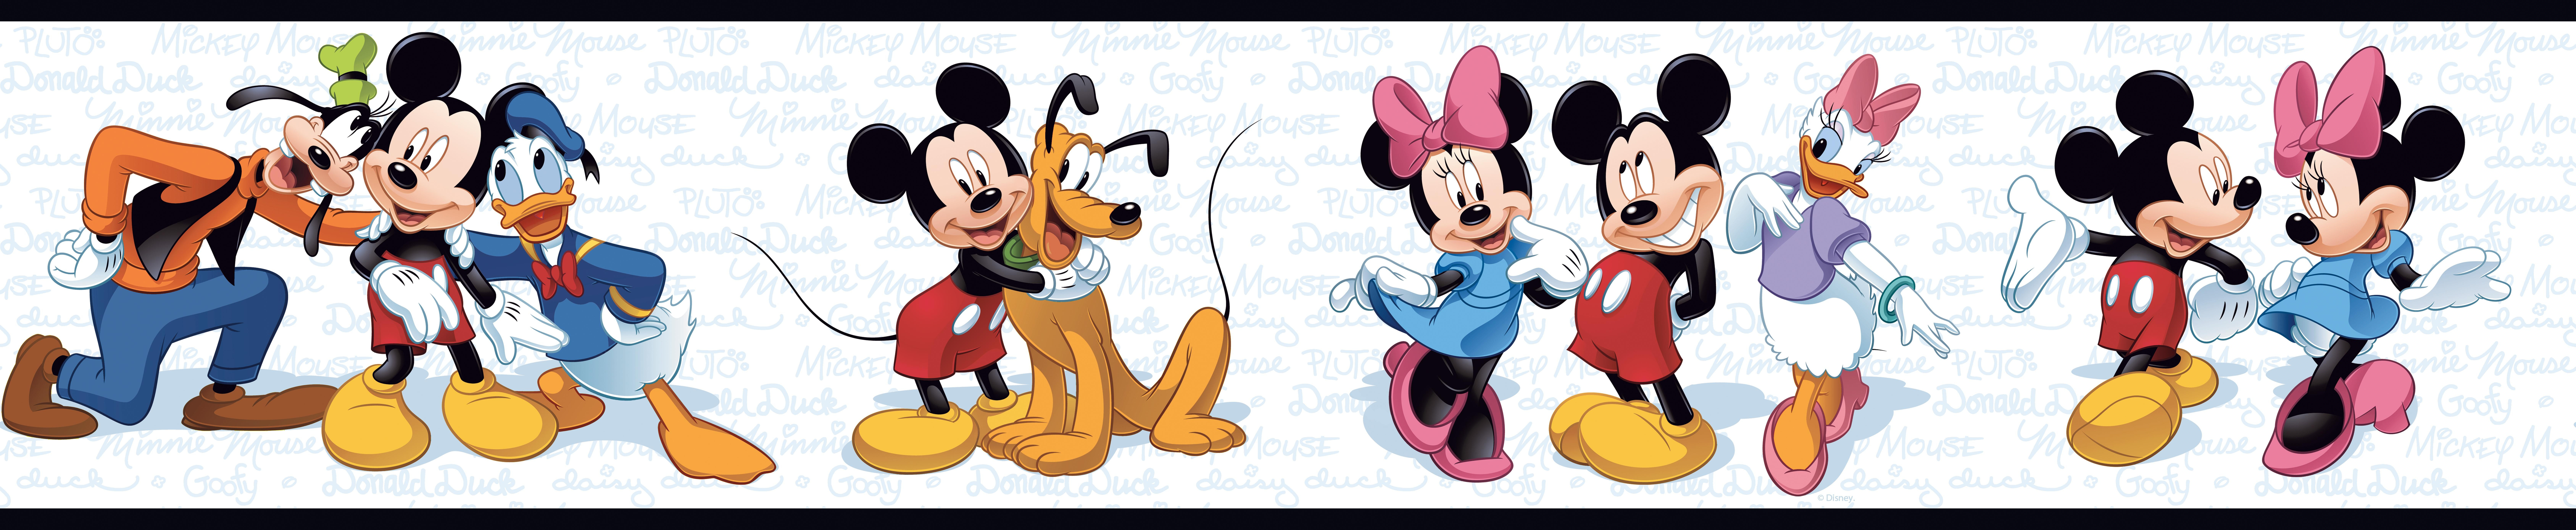 Rcjrqerli At Mickey Mouse Wall - Disney Mickey Mouse & Friends Stickers Books - HD Wallpaper 